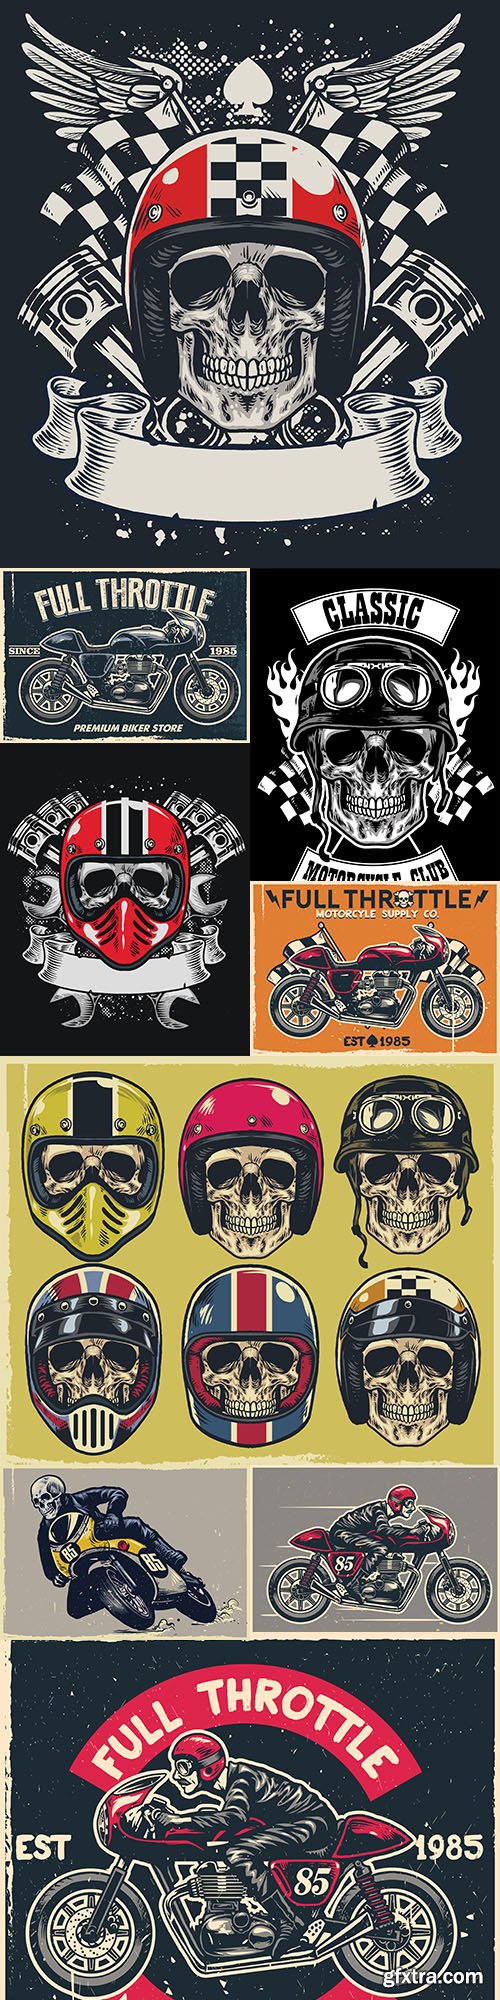 Skull and racer on motorcycle grunge design illustrations